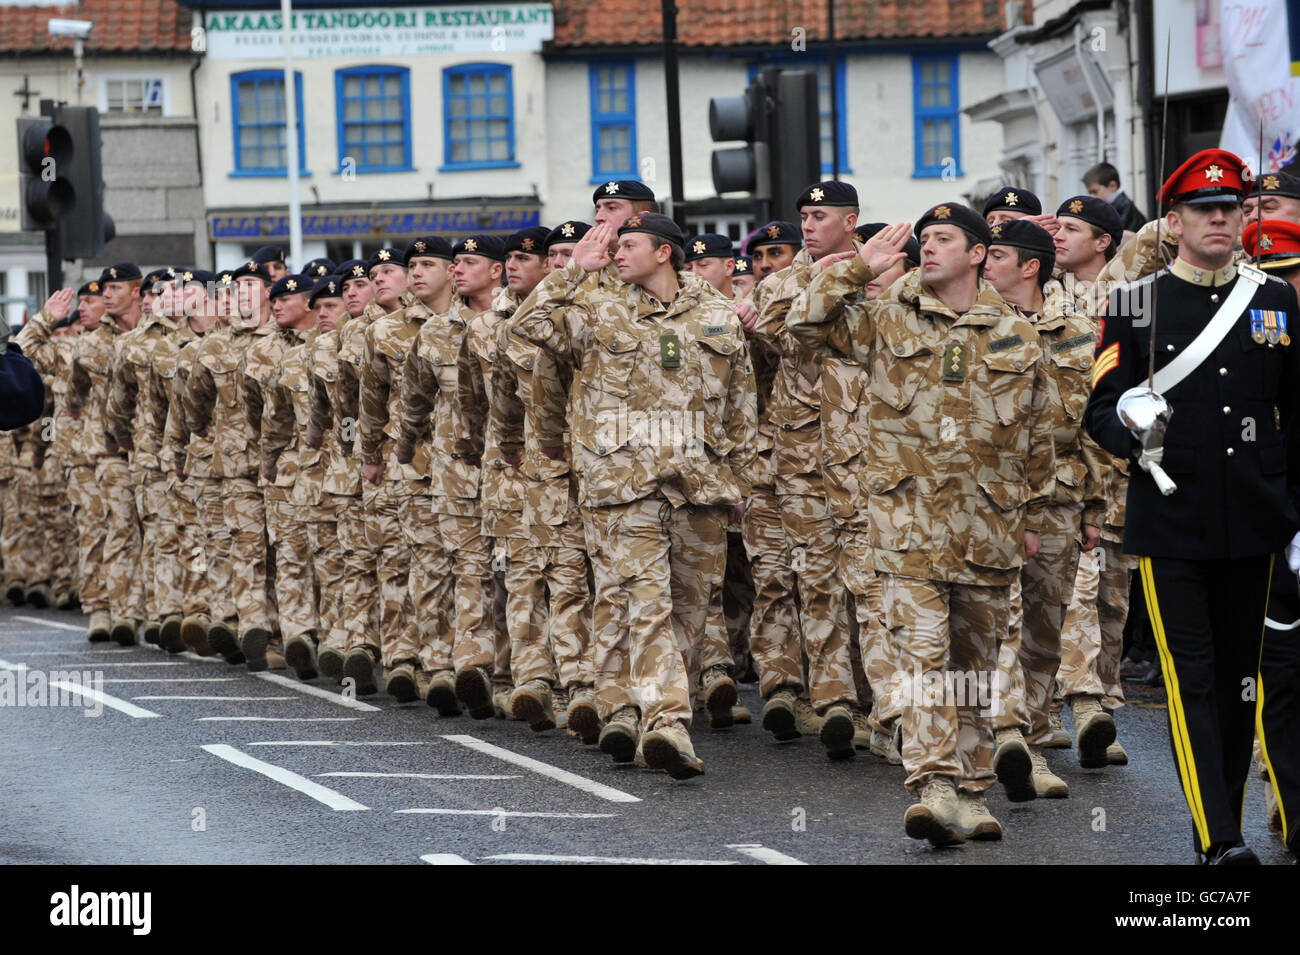 Soldiers of the Light Dragoons parade through the centre of Dereham, Norfolk, following their return from duty in Afghanistan. Stock Photo